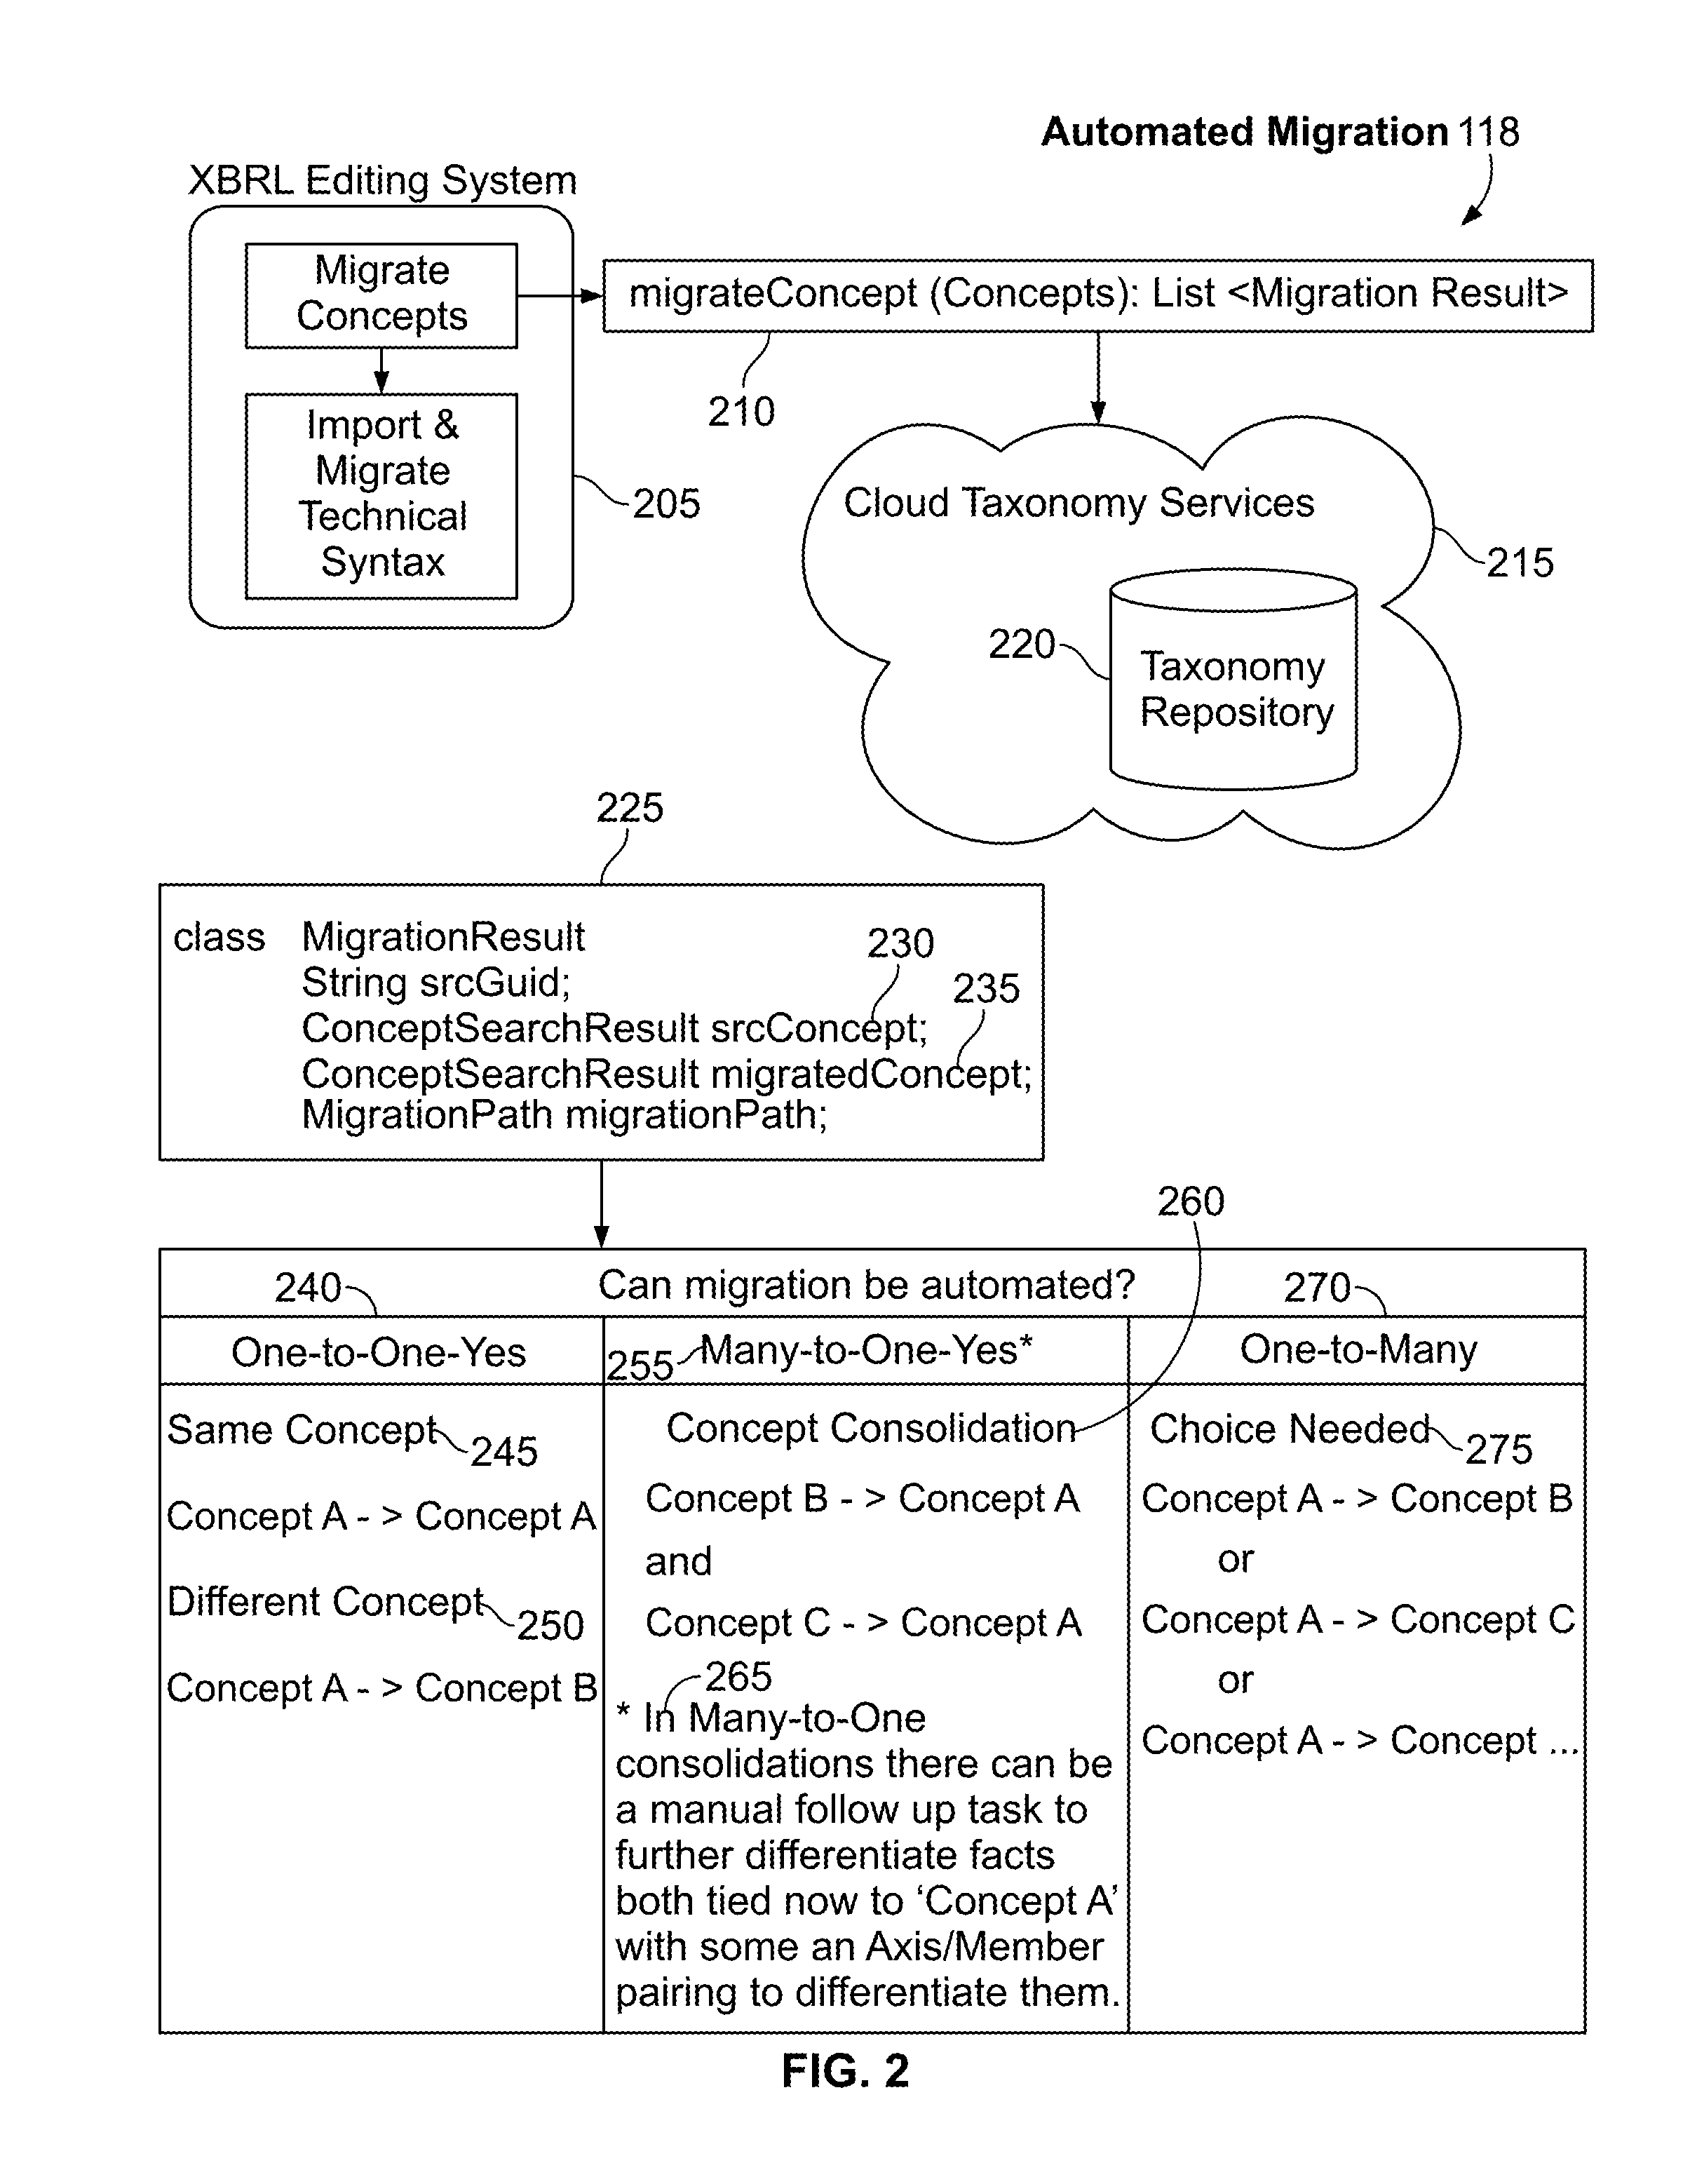 Systems and methods for automated taxonomy migration in an XBRL document